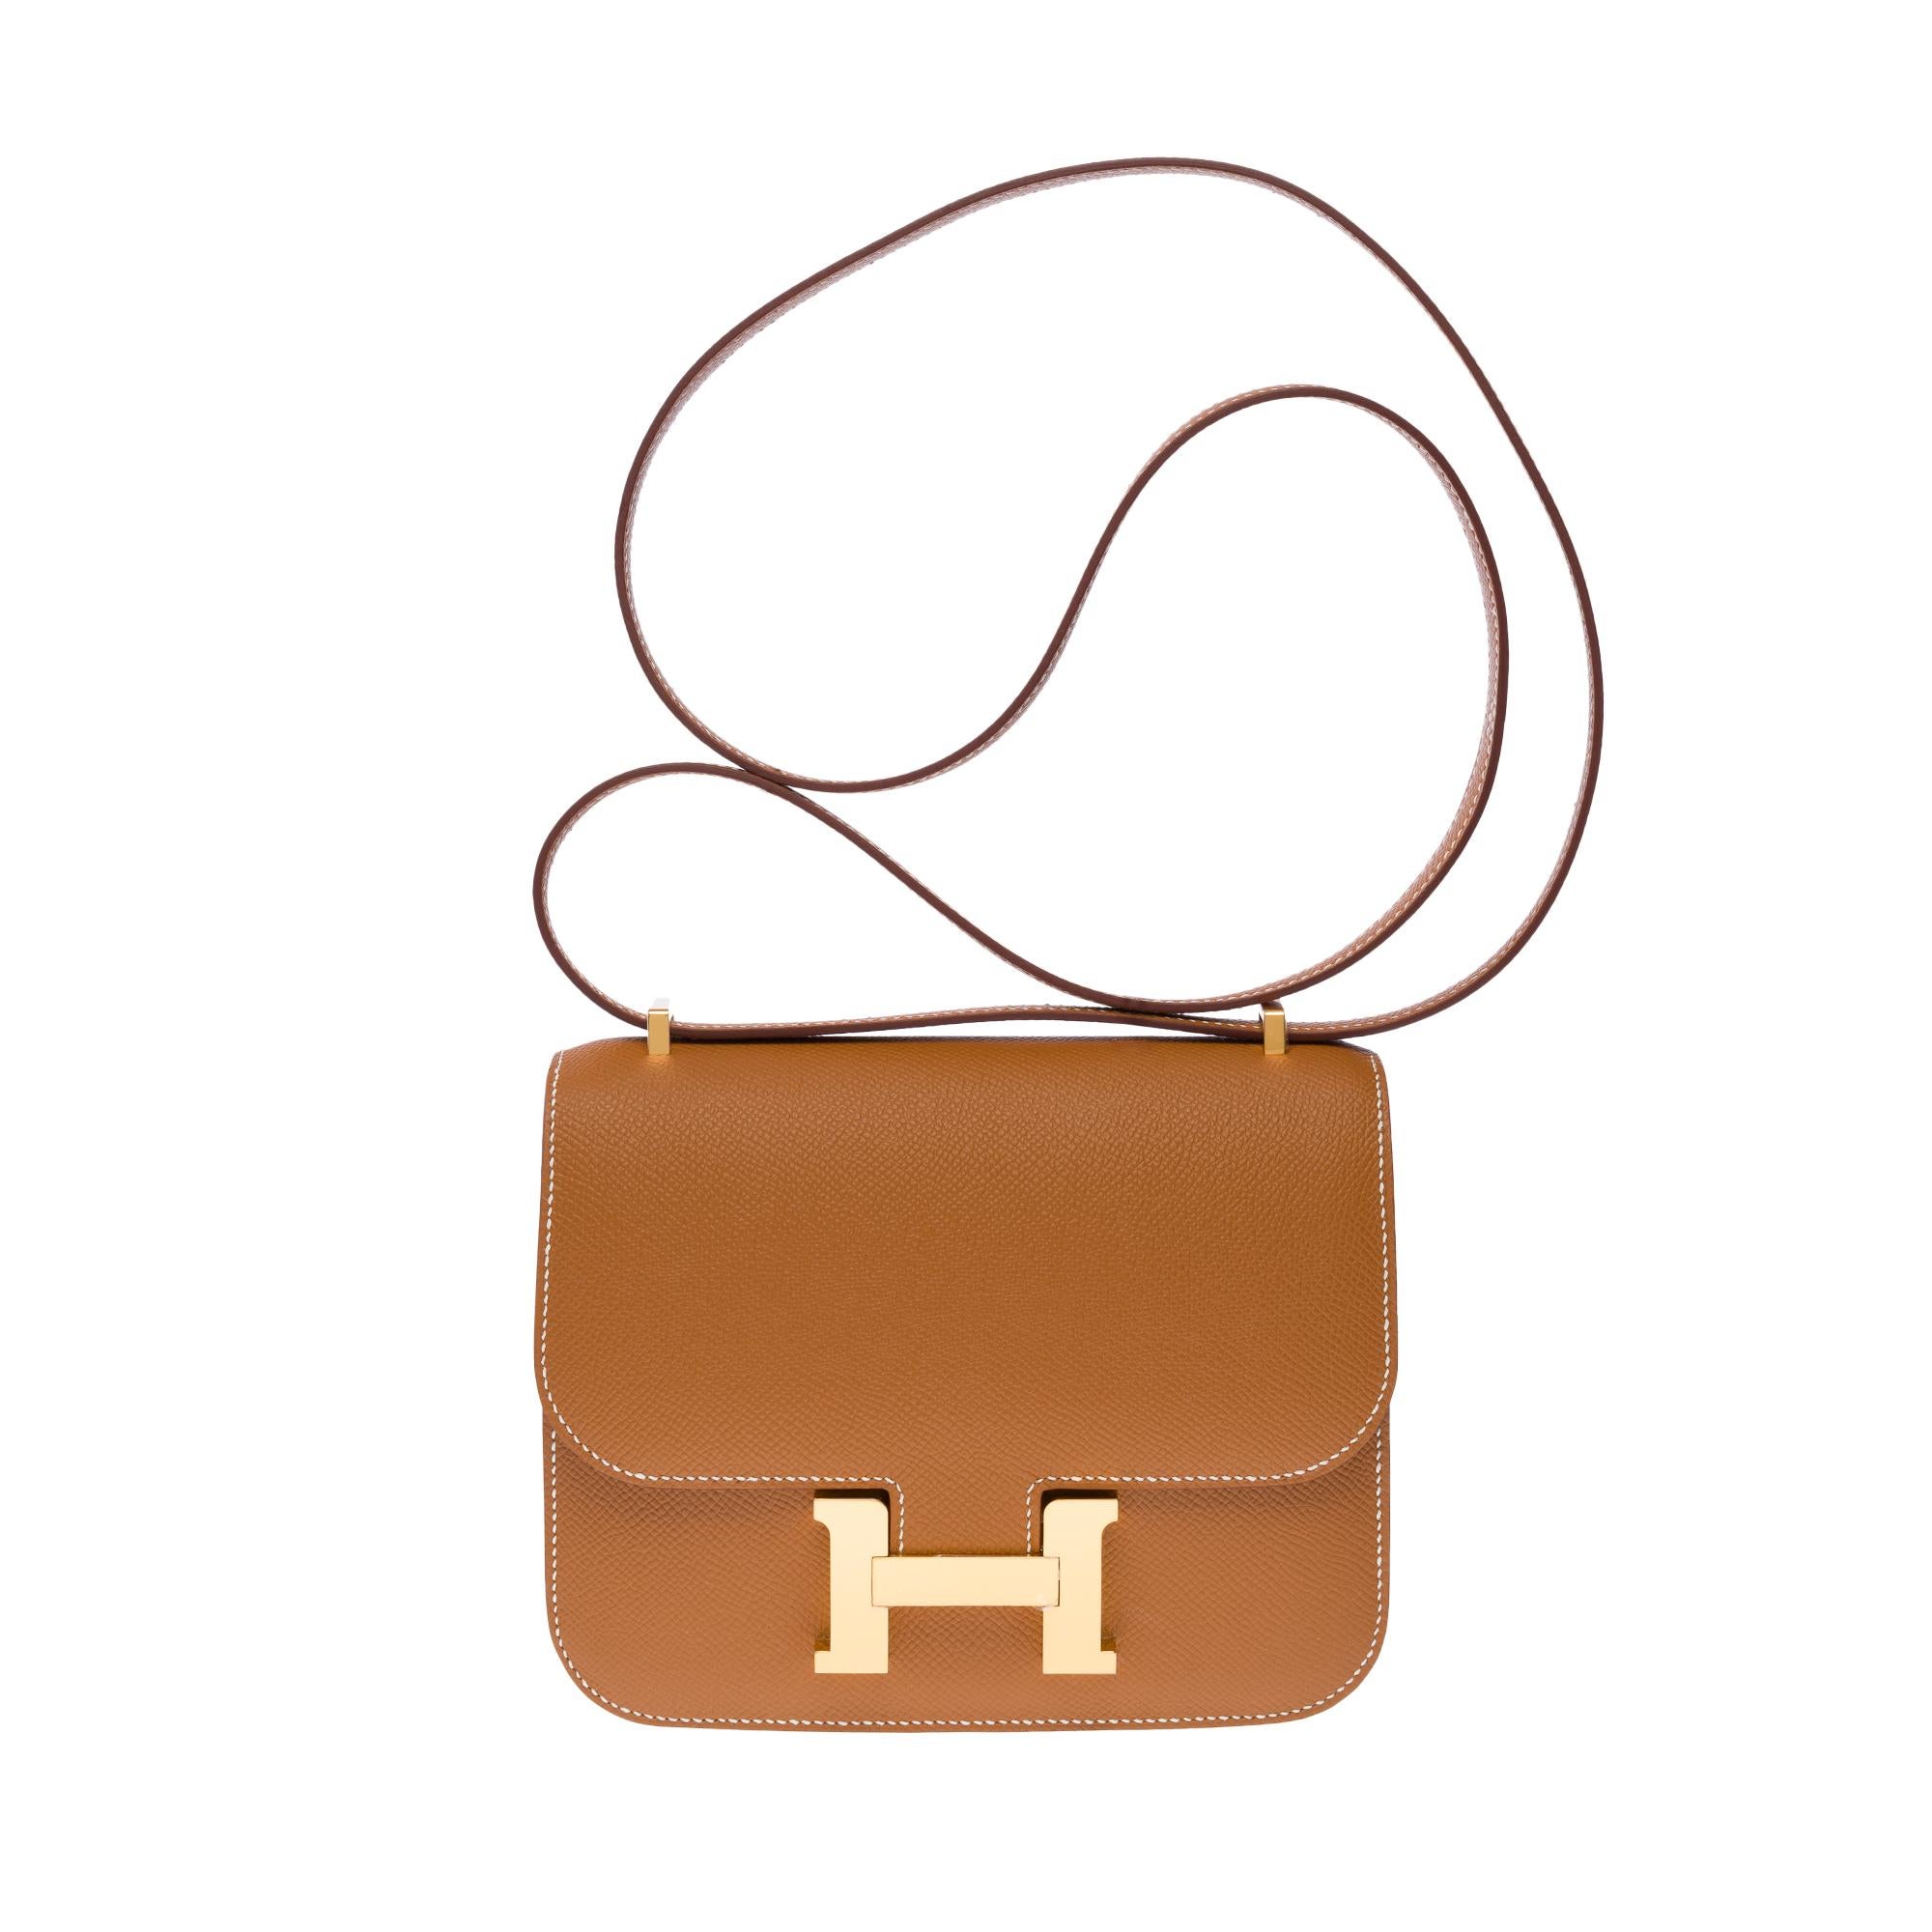 Exquisite Hermès Constance Mini 18 mirror shoulder bag in Gold Epsom calf leather with white stitching, gold plated metal hardware, a shoulder strap in gold epsom leather allowing a shoulder or shoulder or crossbody carry

Logo closure on flap
Gold